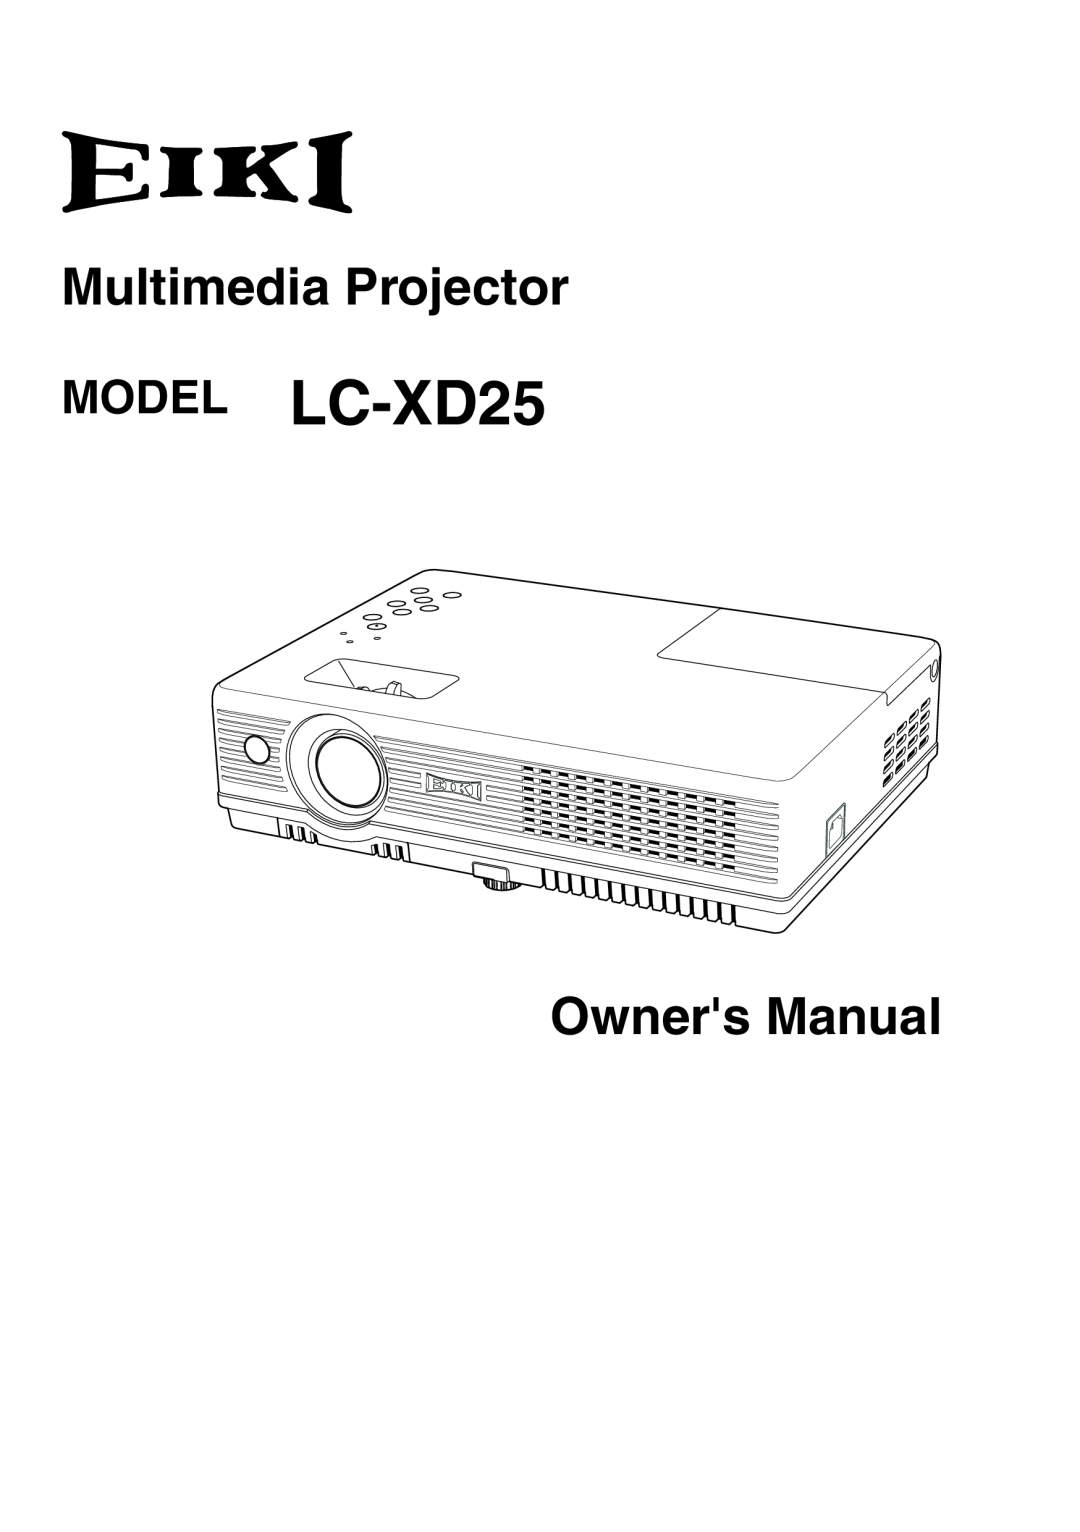 Eiki owner manual MODEL LC-XD25, Multimedia Projector, Owners Manual 